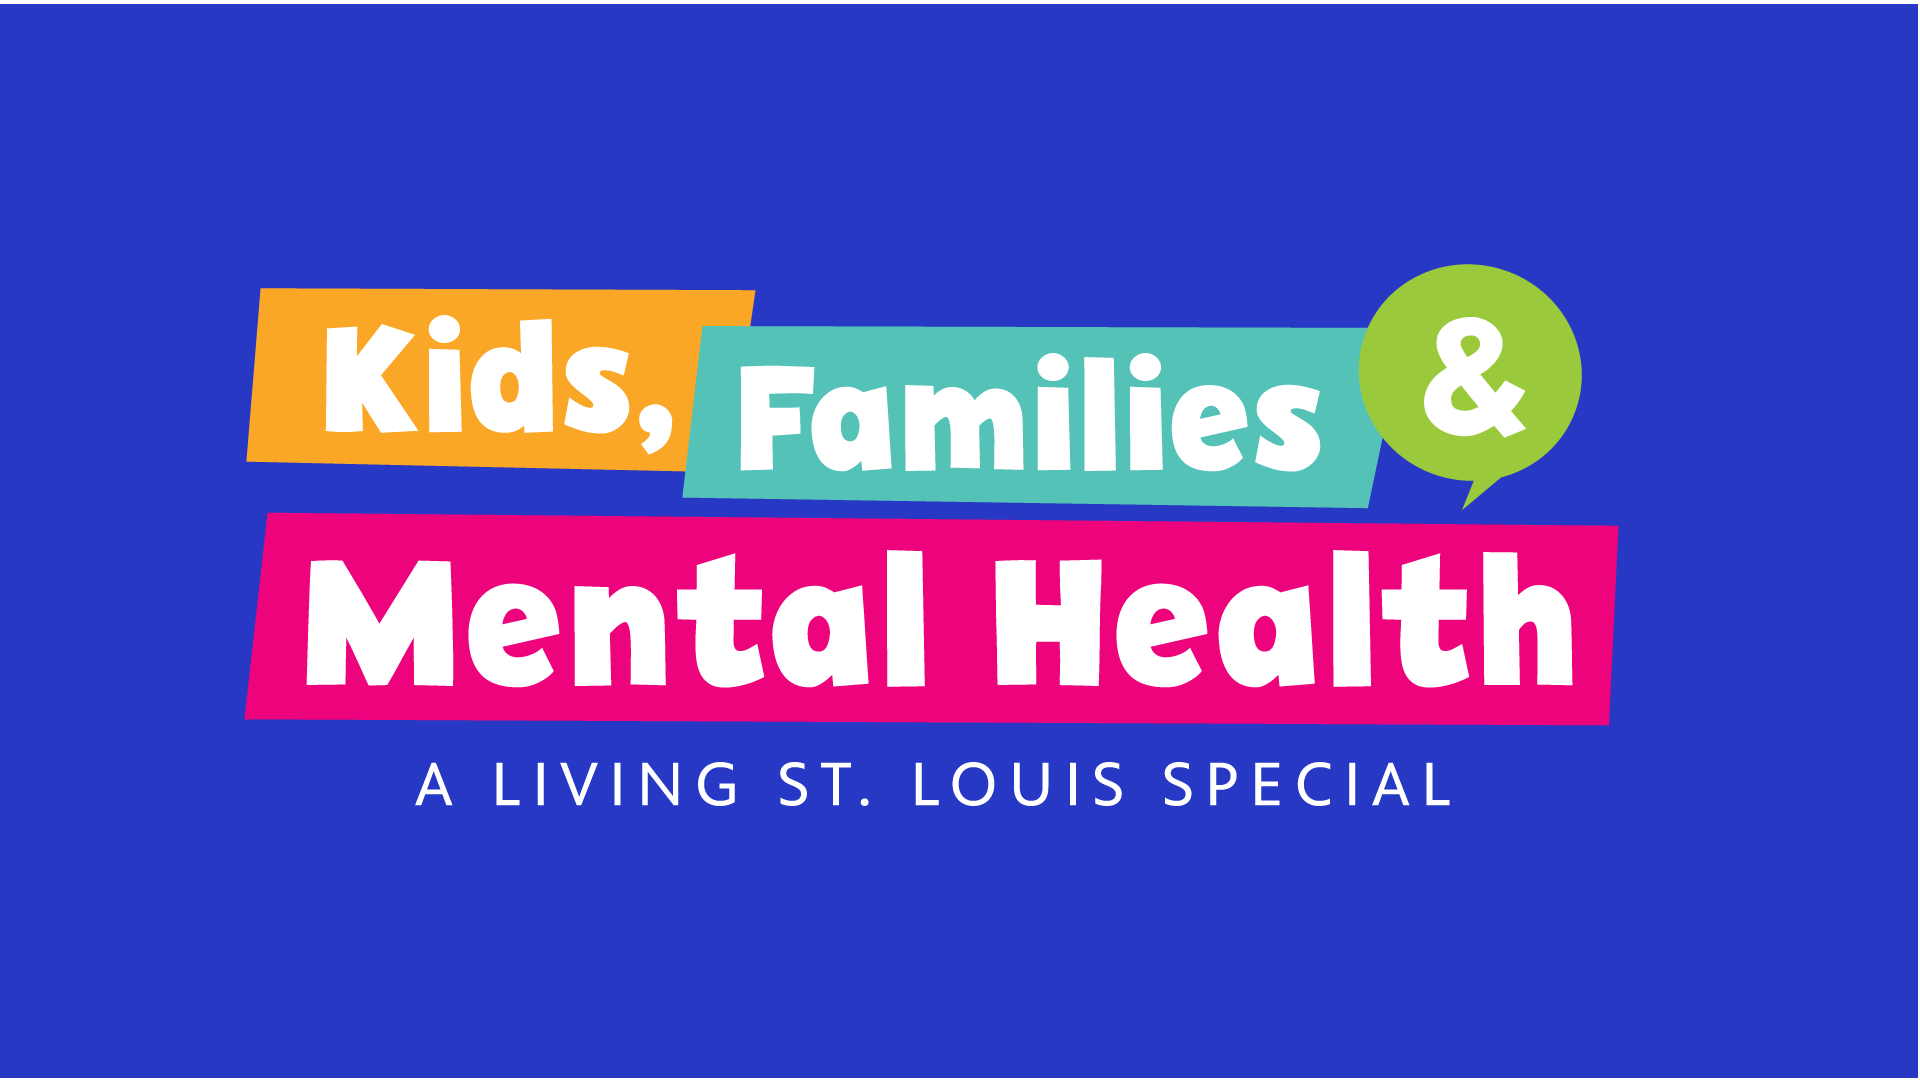 Living St. Louis Special: Kids, Families, and Mental Health